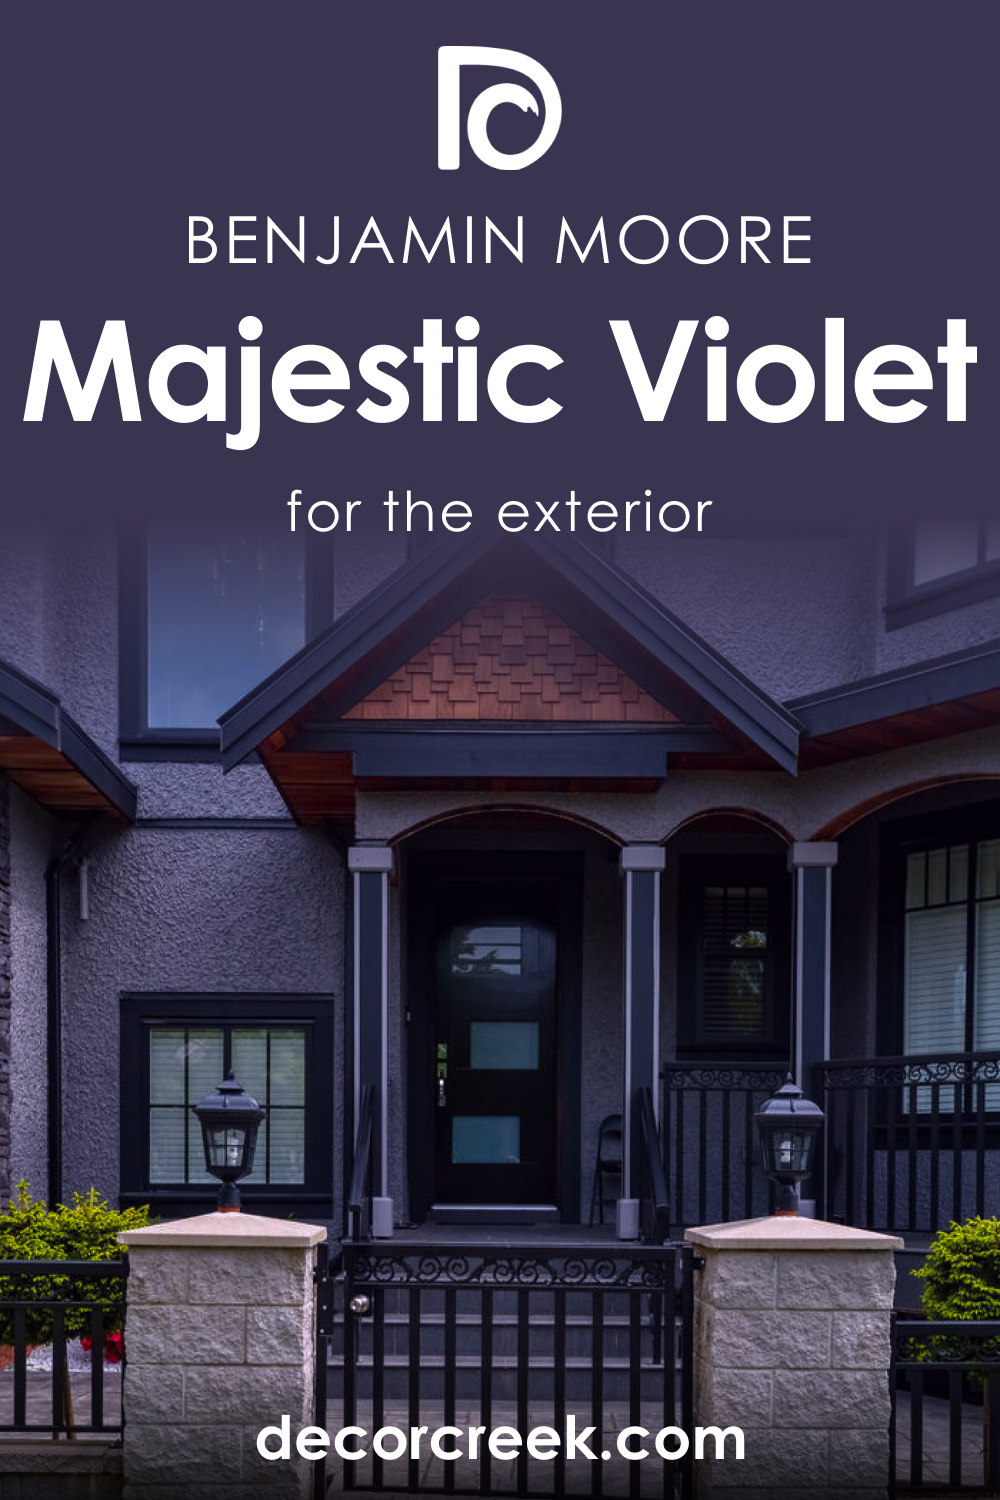 Majestic Violet 2068-10 for an Exterior